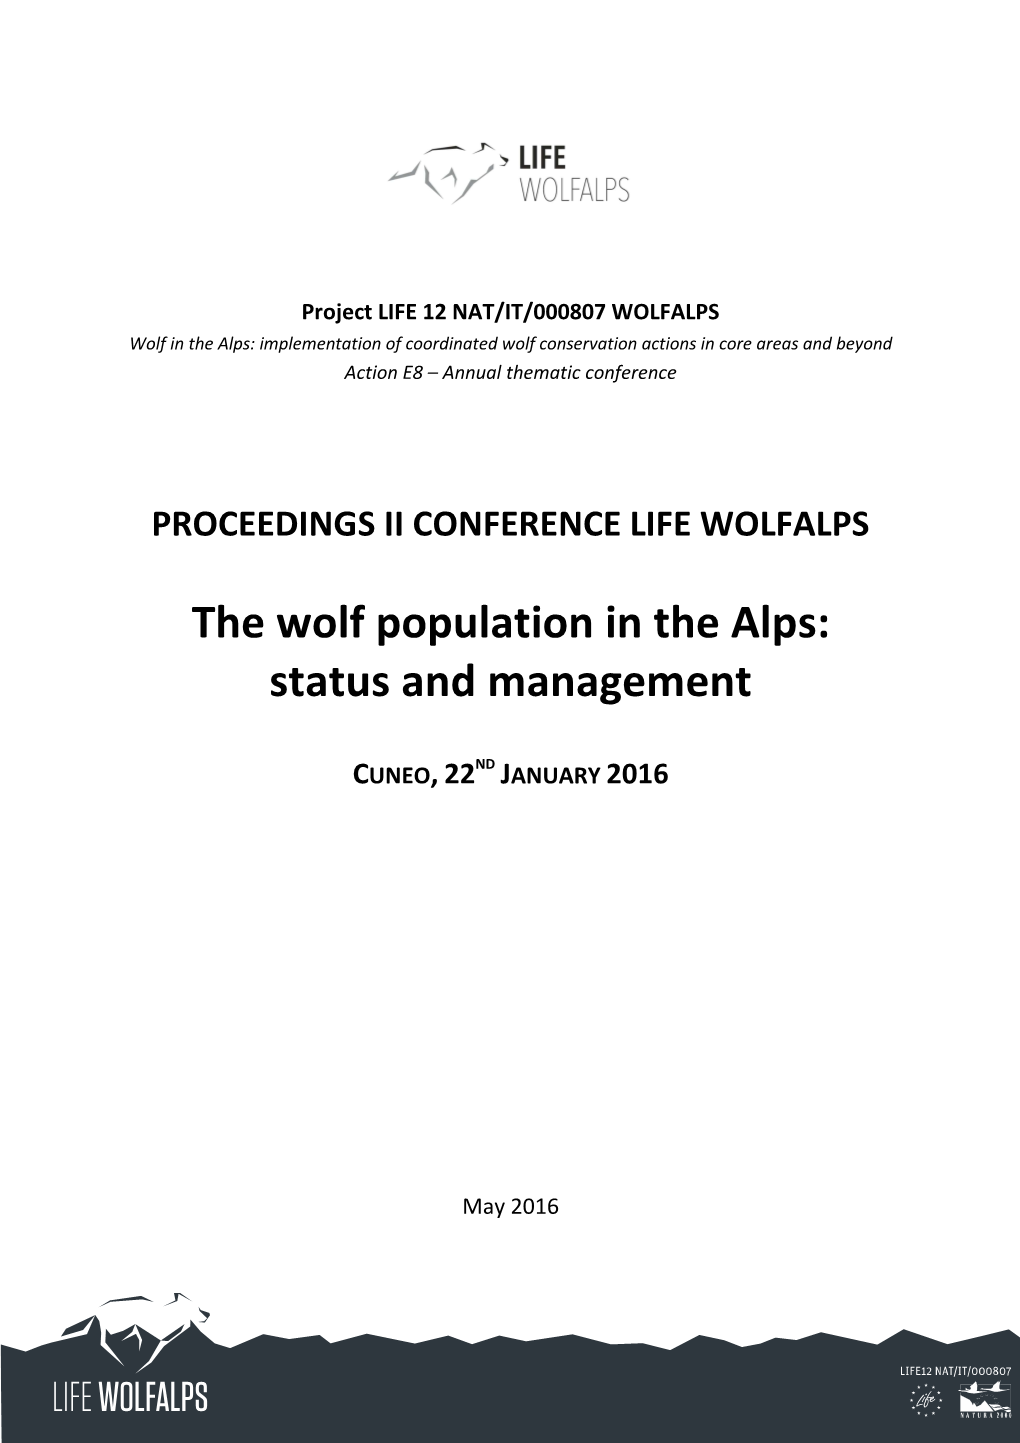 The Wolf Population in the Alps: Status and Management